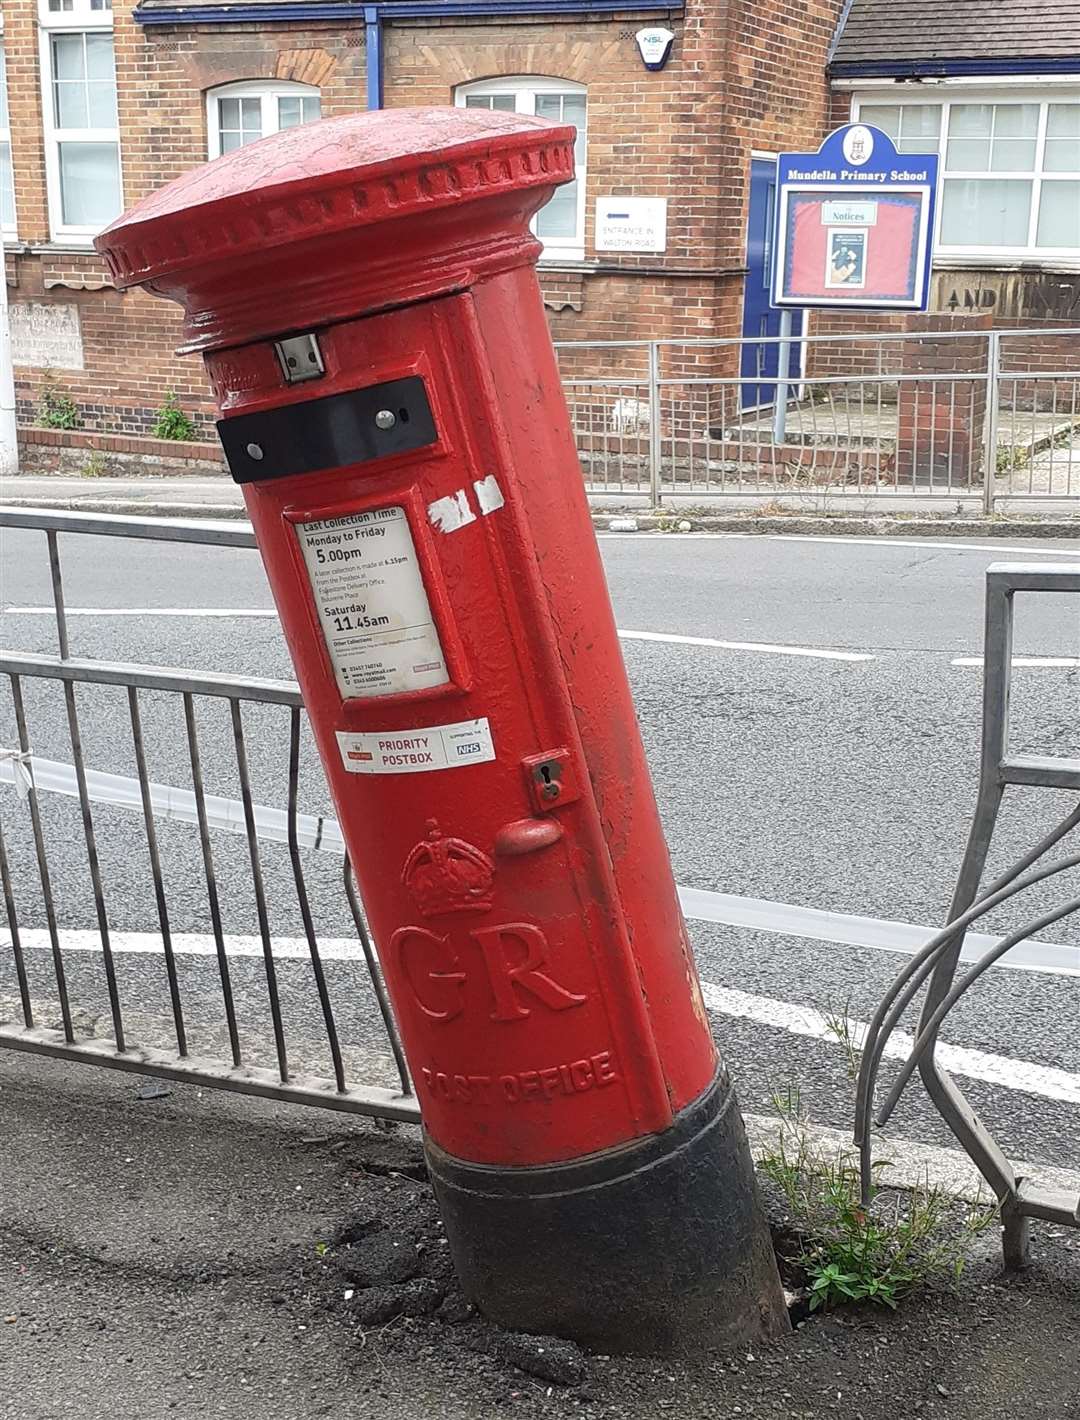 There are concerns over this leaning postbox in Black Bull Road. Photos: Elaine Nicholson